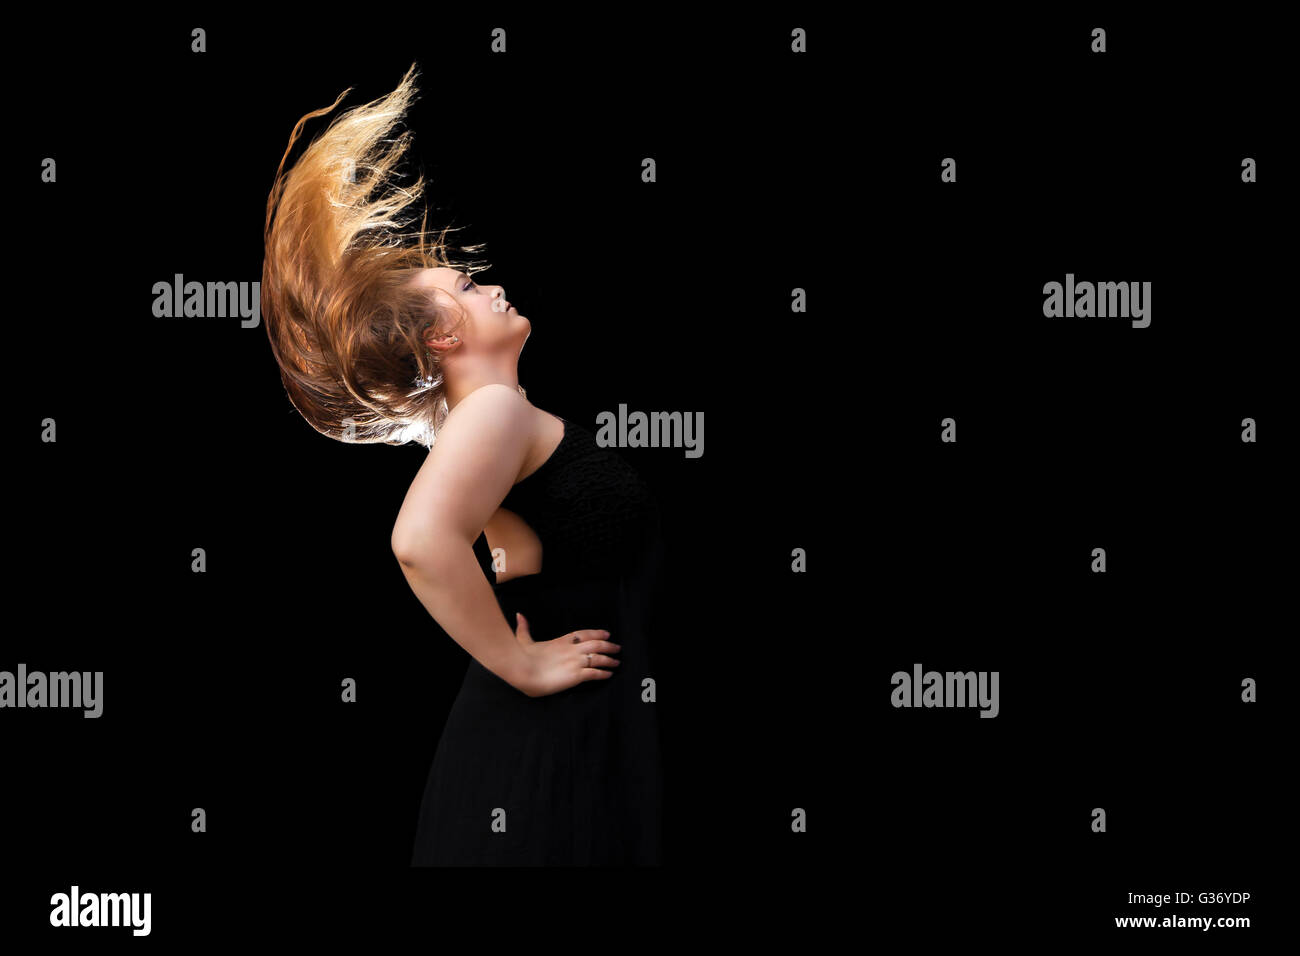 A teenage girl with beautiful, long, blond hair flips her hair against a black, background.  Her hair is back lit. Stock Photo